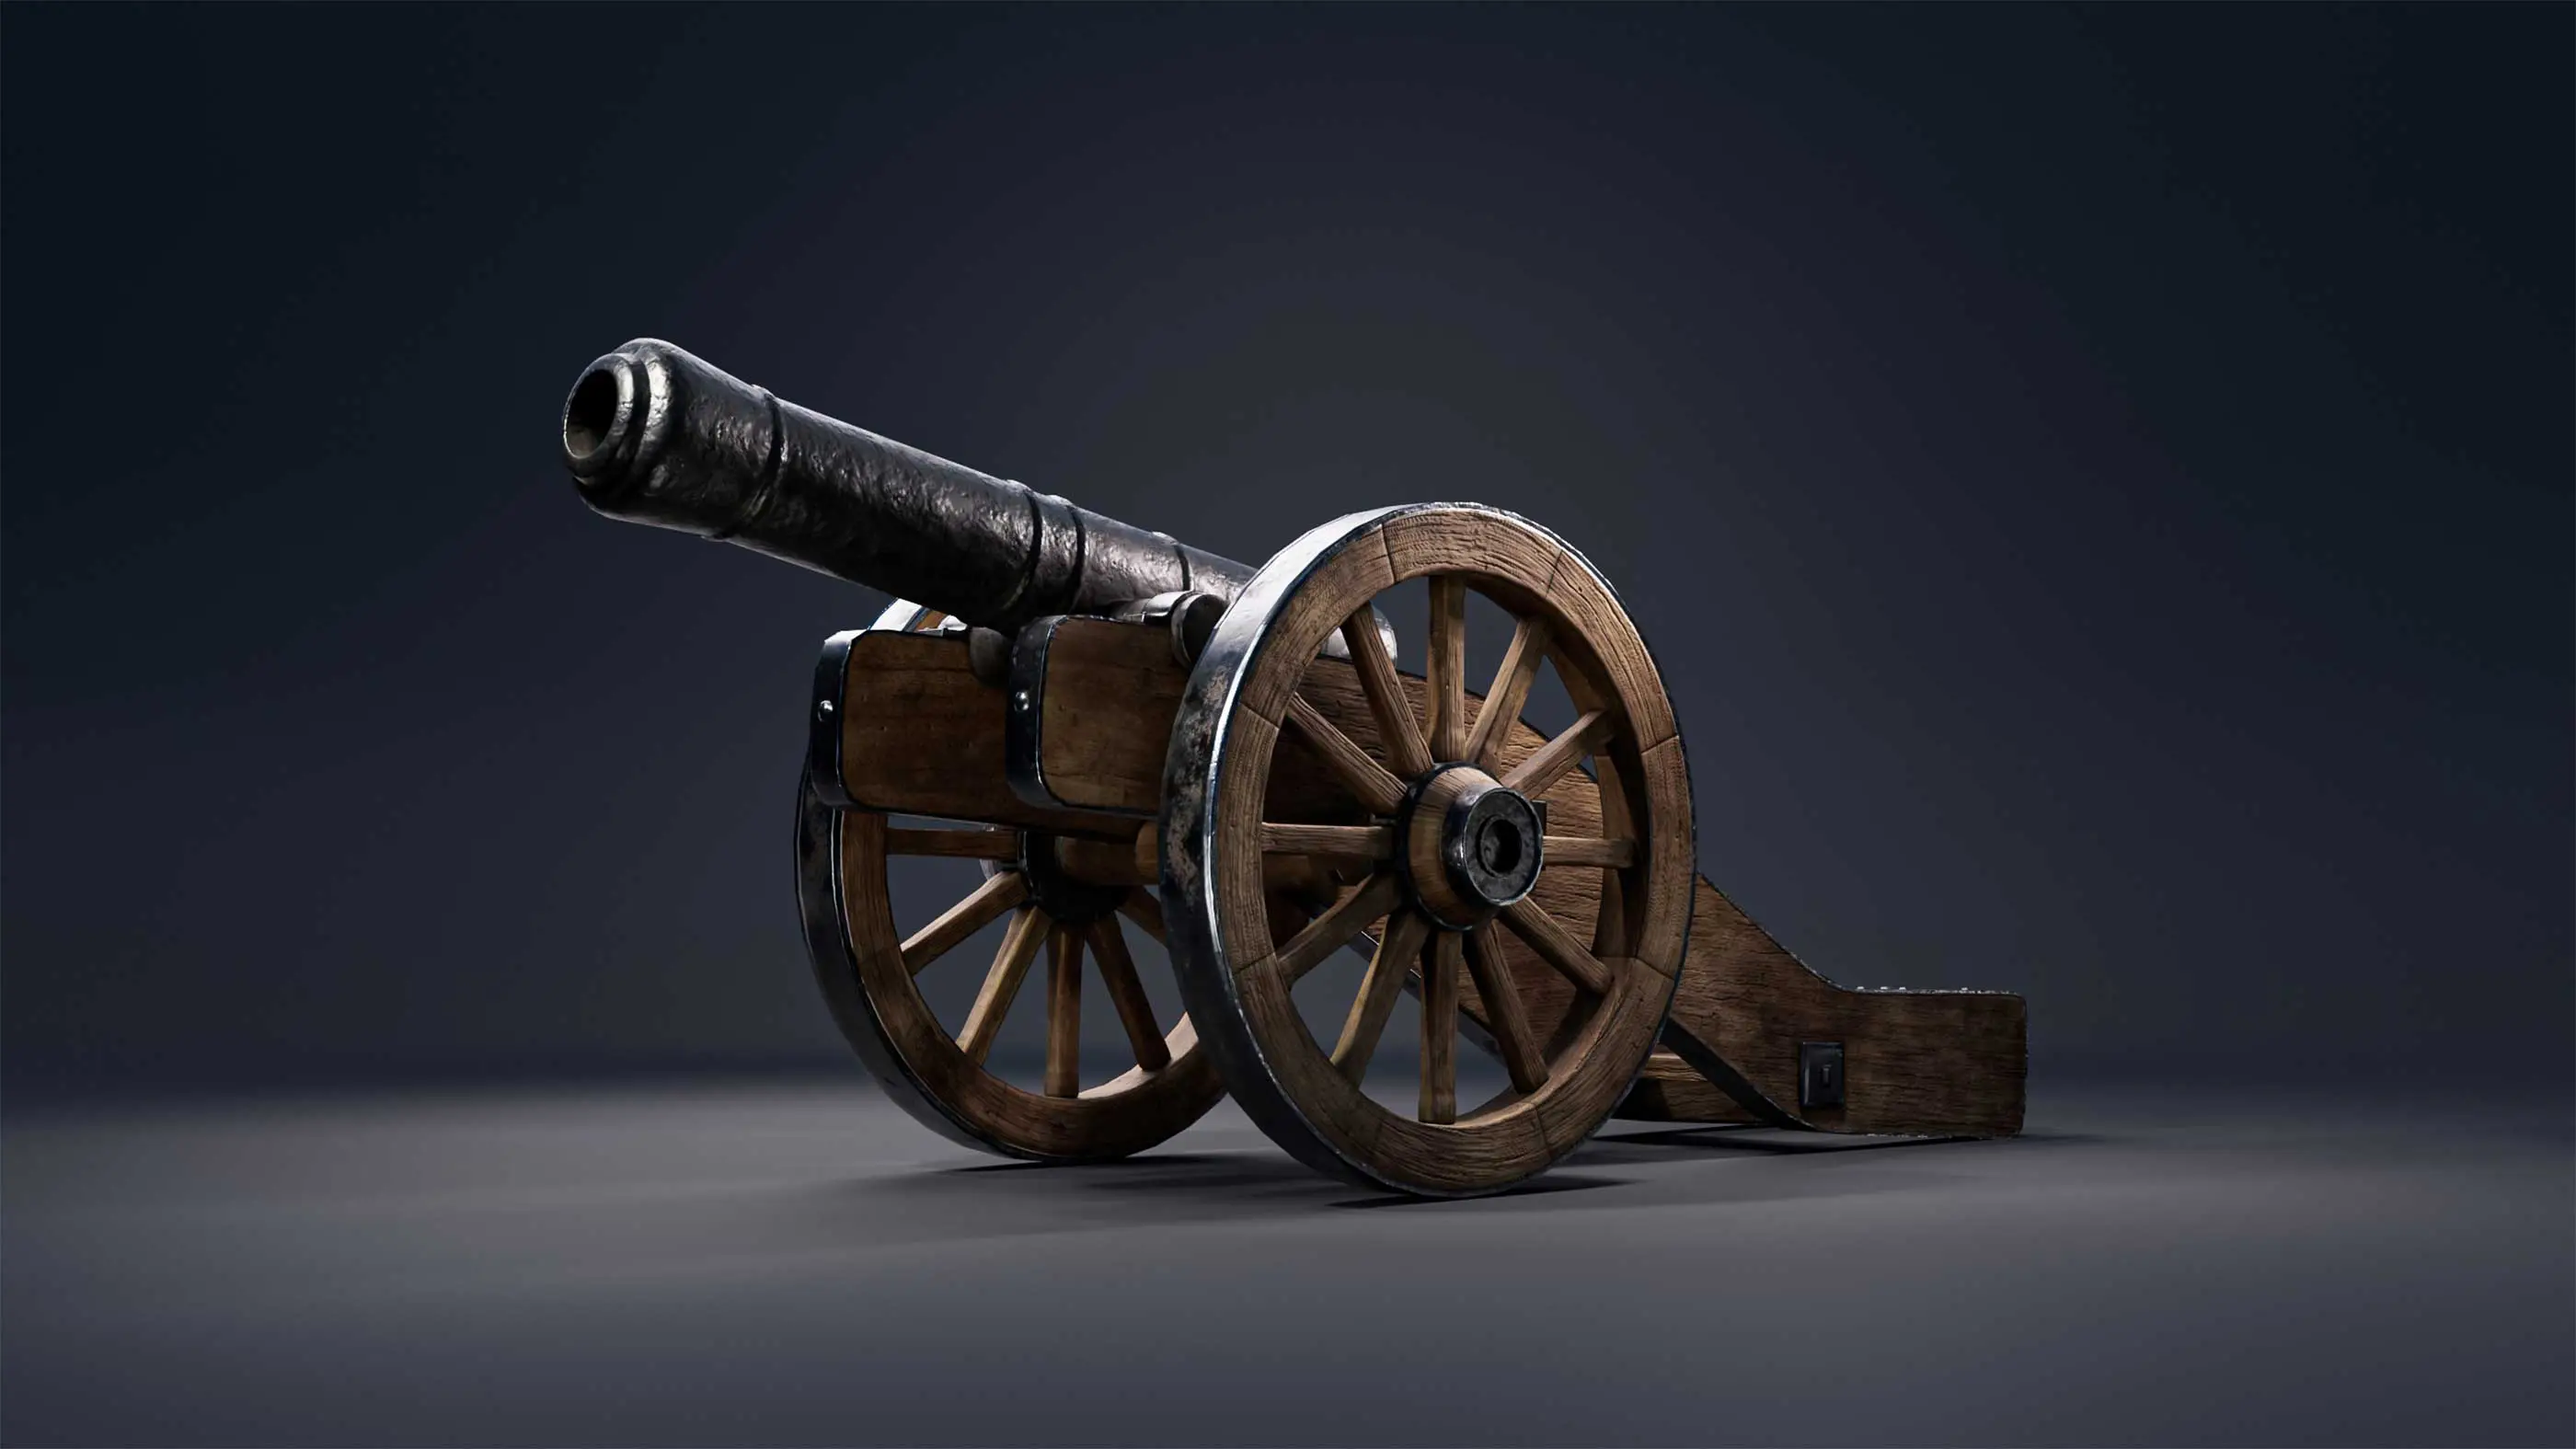 A 3D render of a medieval cannon mounted on a wooden base.